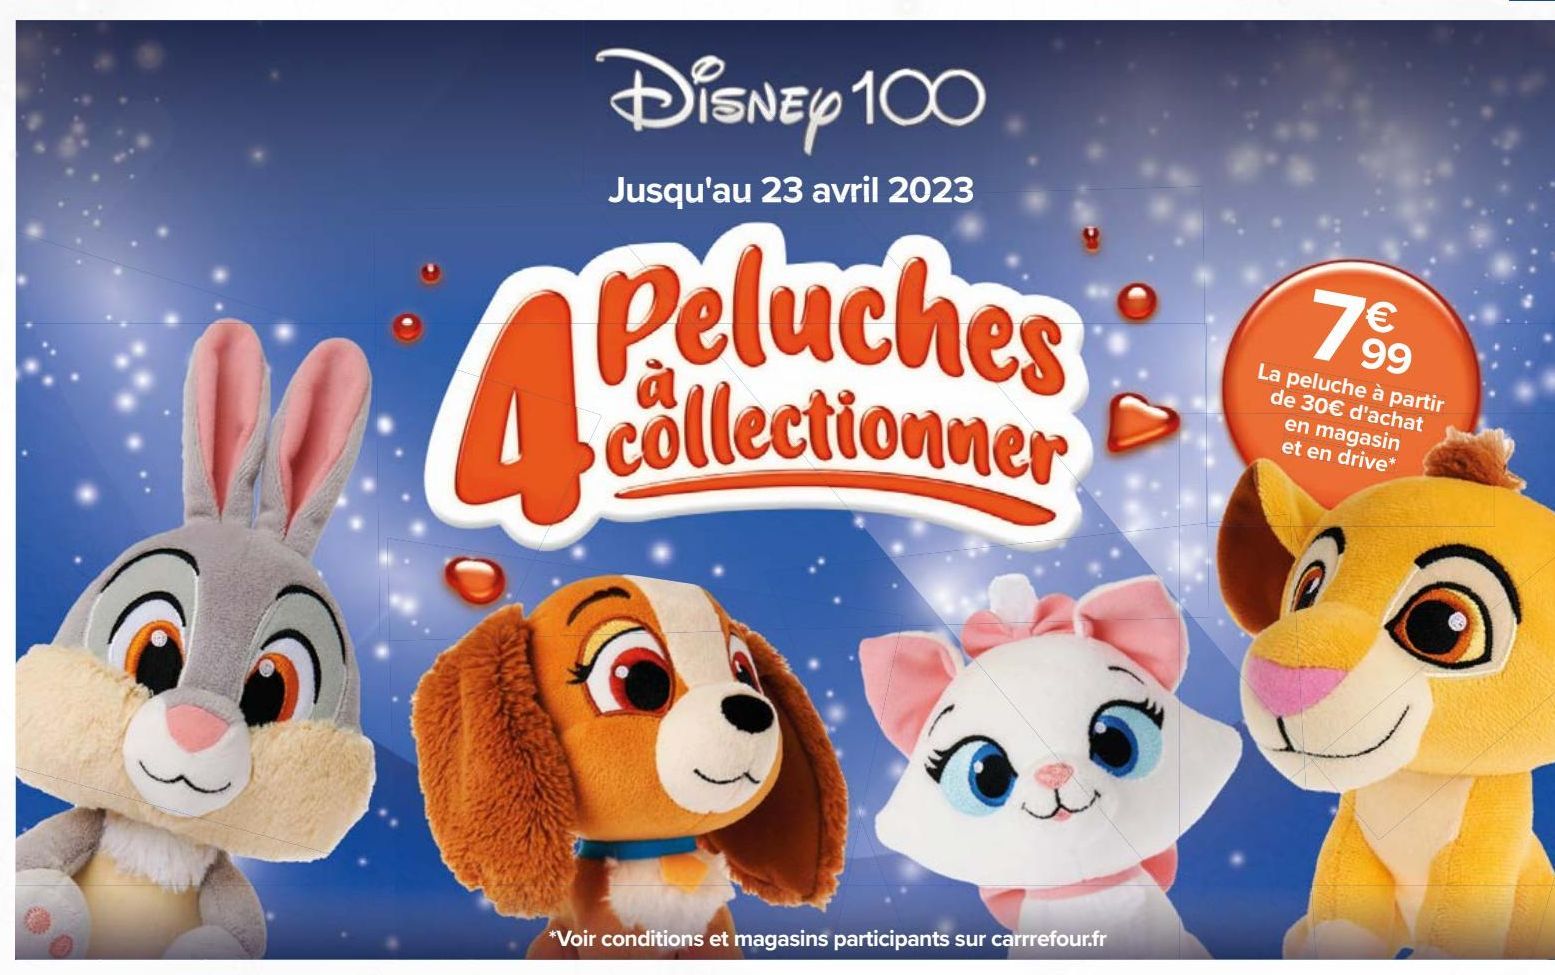 4 Peluches à collectionner